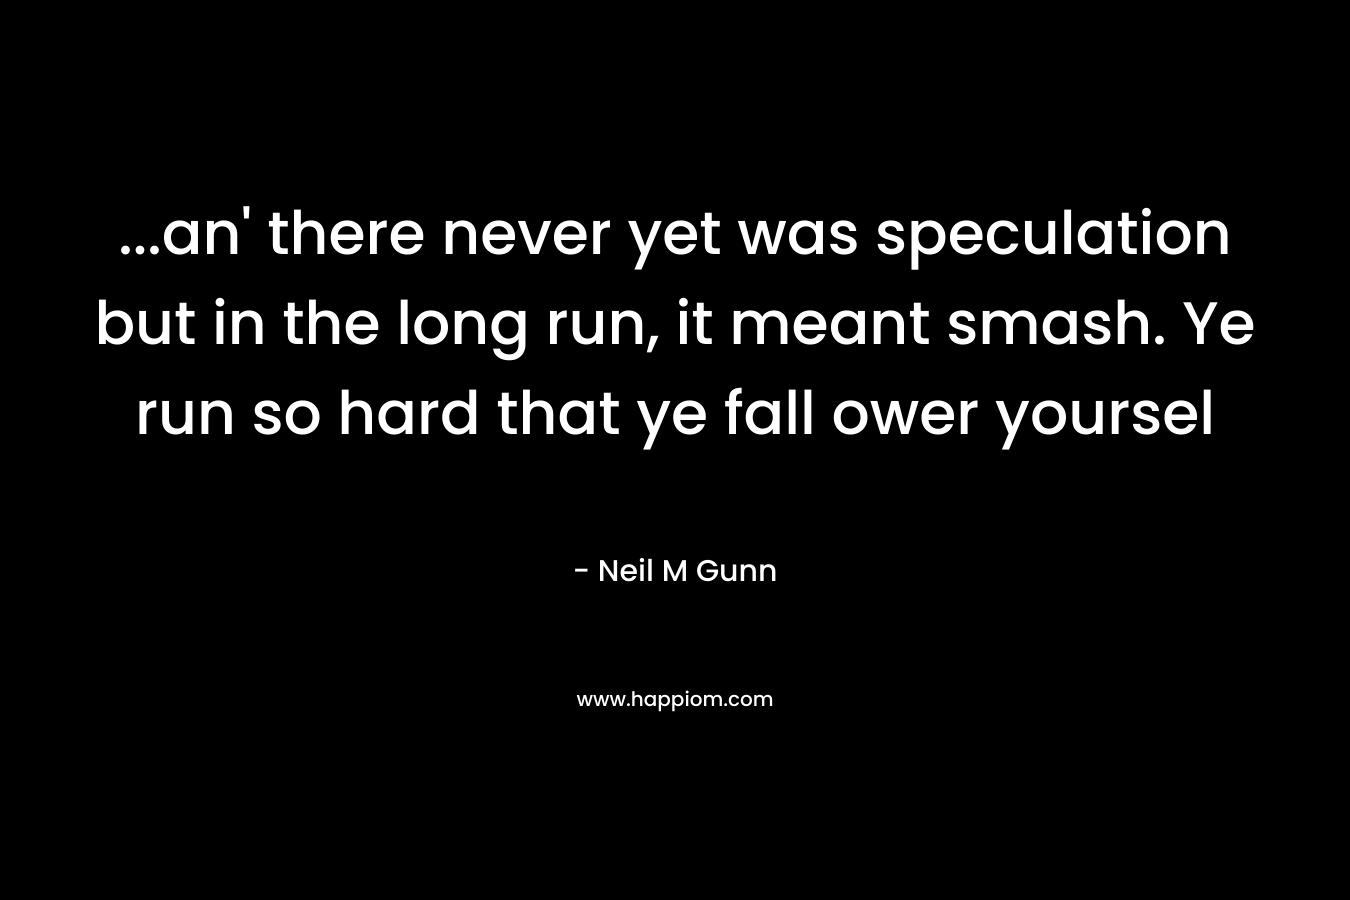 ...an' there never yet was speculation but in the long run, it meant smash. Ye run so hard that ye fall ower yoursel